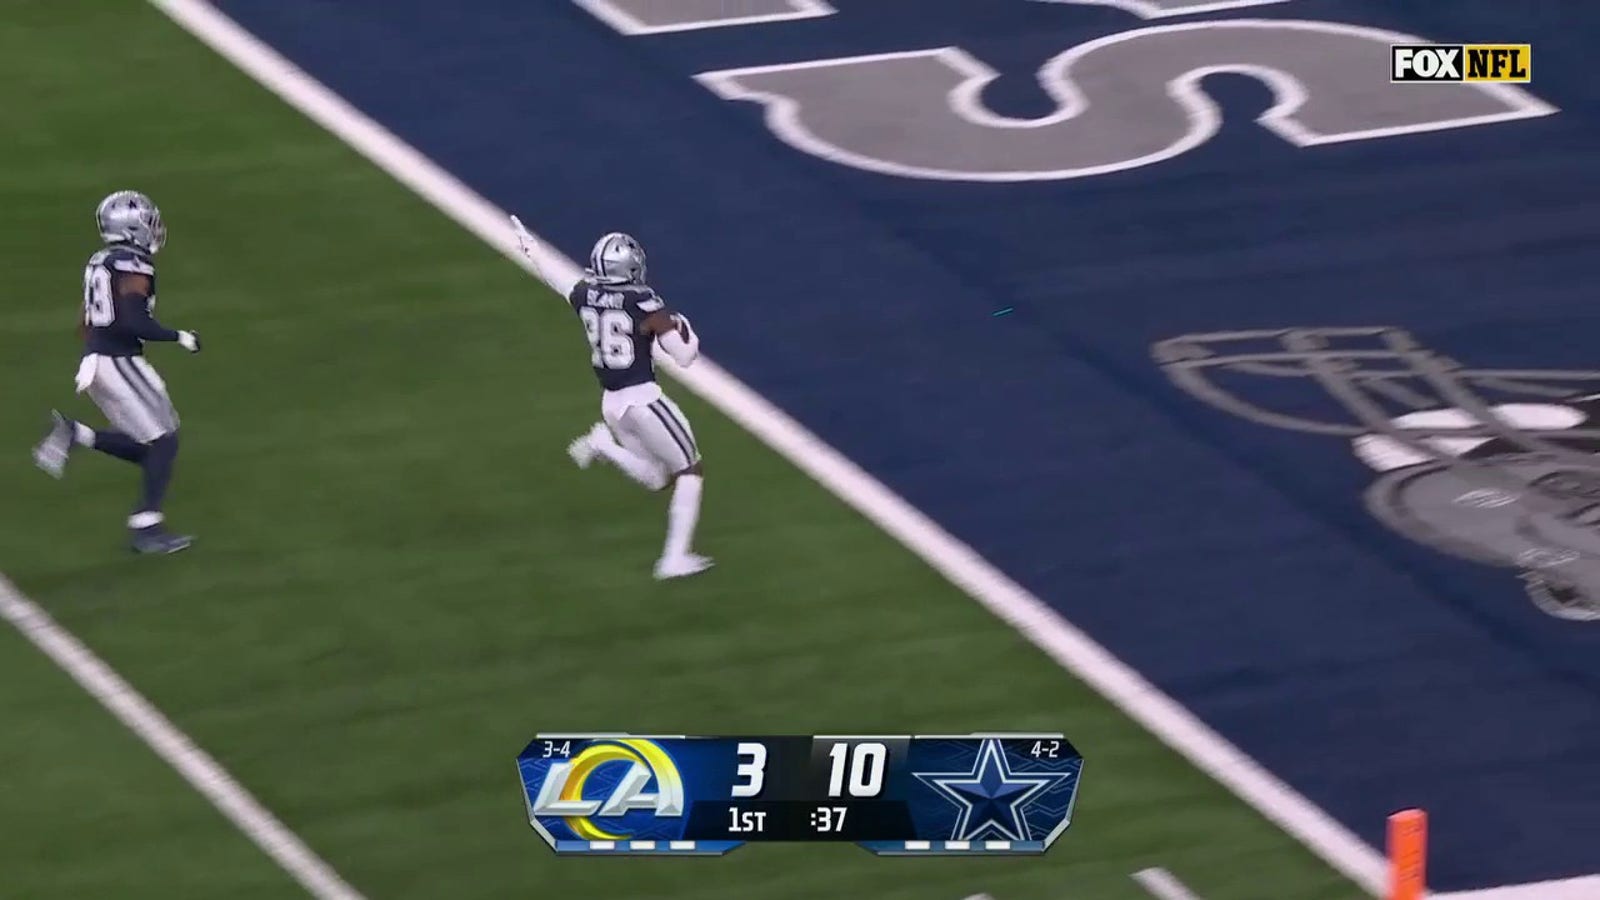 Daron Bland returns an interception 30 yards for a TD to extend Cowboys' lead against Rams